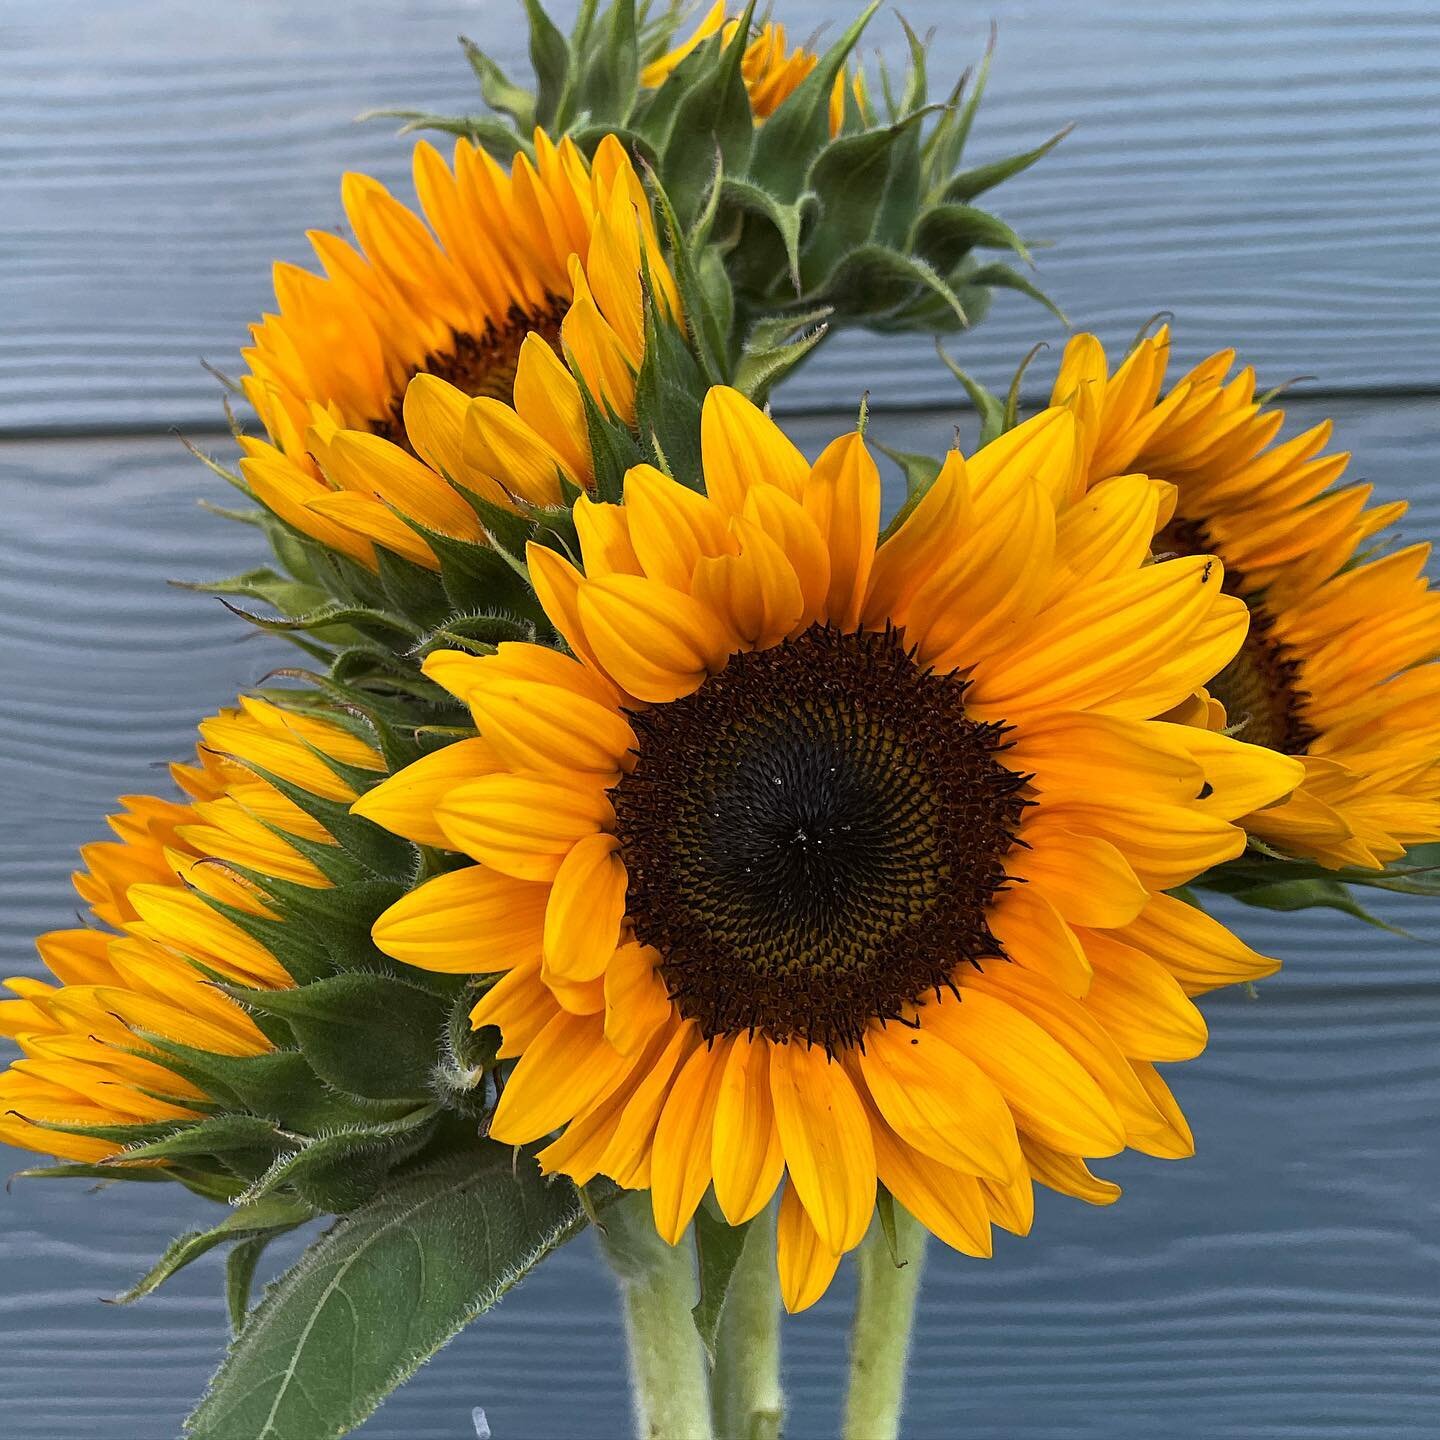 Dropped off some sunflower bunches at @localsfoodhub today! If you&rsquo;re in town, grab a bite of their delicious pizza and take home some sunnies to your hunnies!